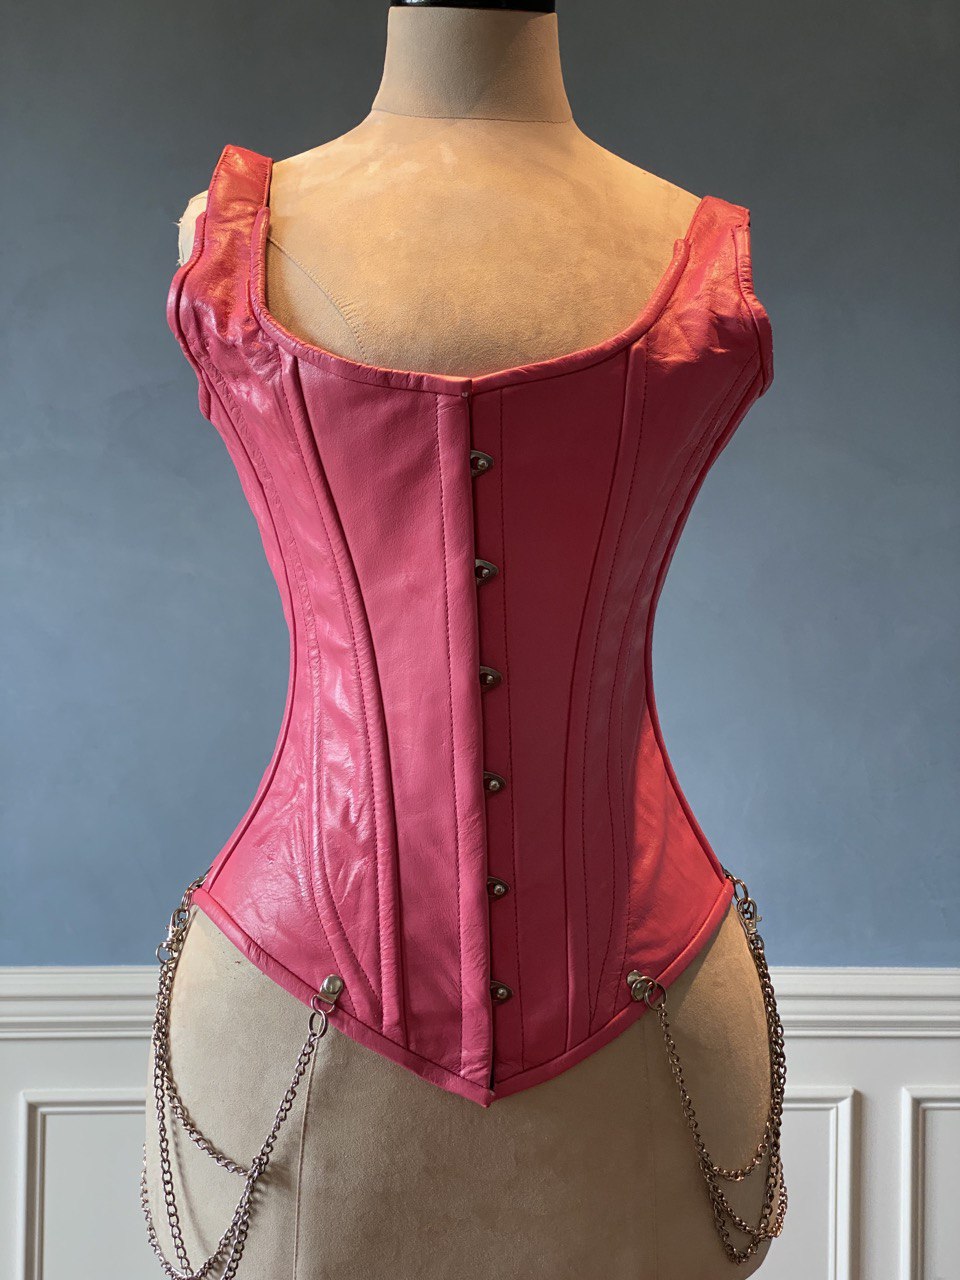 Salmon color leather corset vest with shoulder straps and chains. Steel-boned corset top for tight lacing. Corsettery